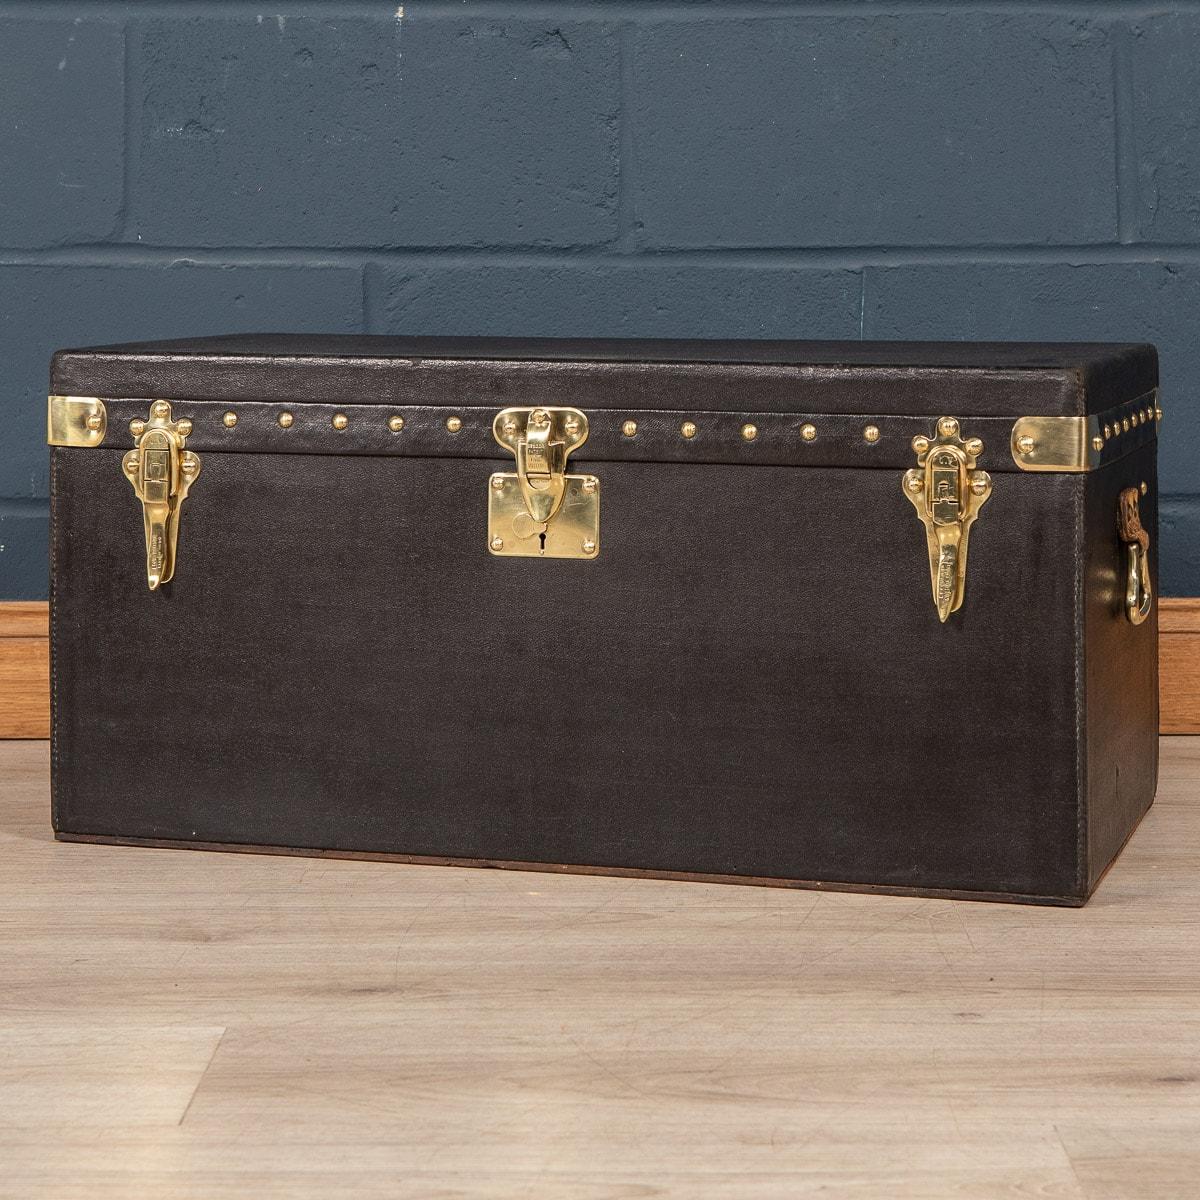 A large and very rare Louis Vuitton car trunk covered in black Vuittonite canvas. Car trunks were usually bespoke made for the owner’s car and would ordinarily be positioned inside the boot of the vehicle or strapped to the back of the vehicle. As